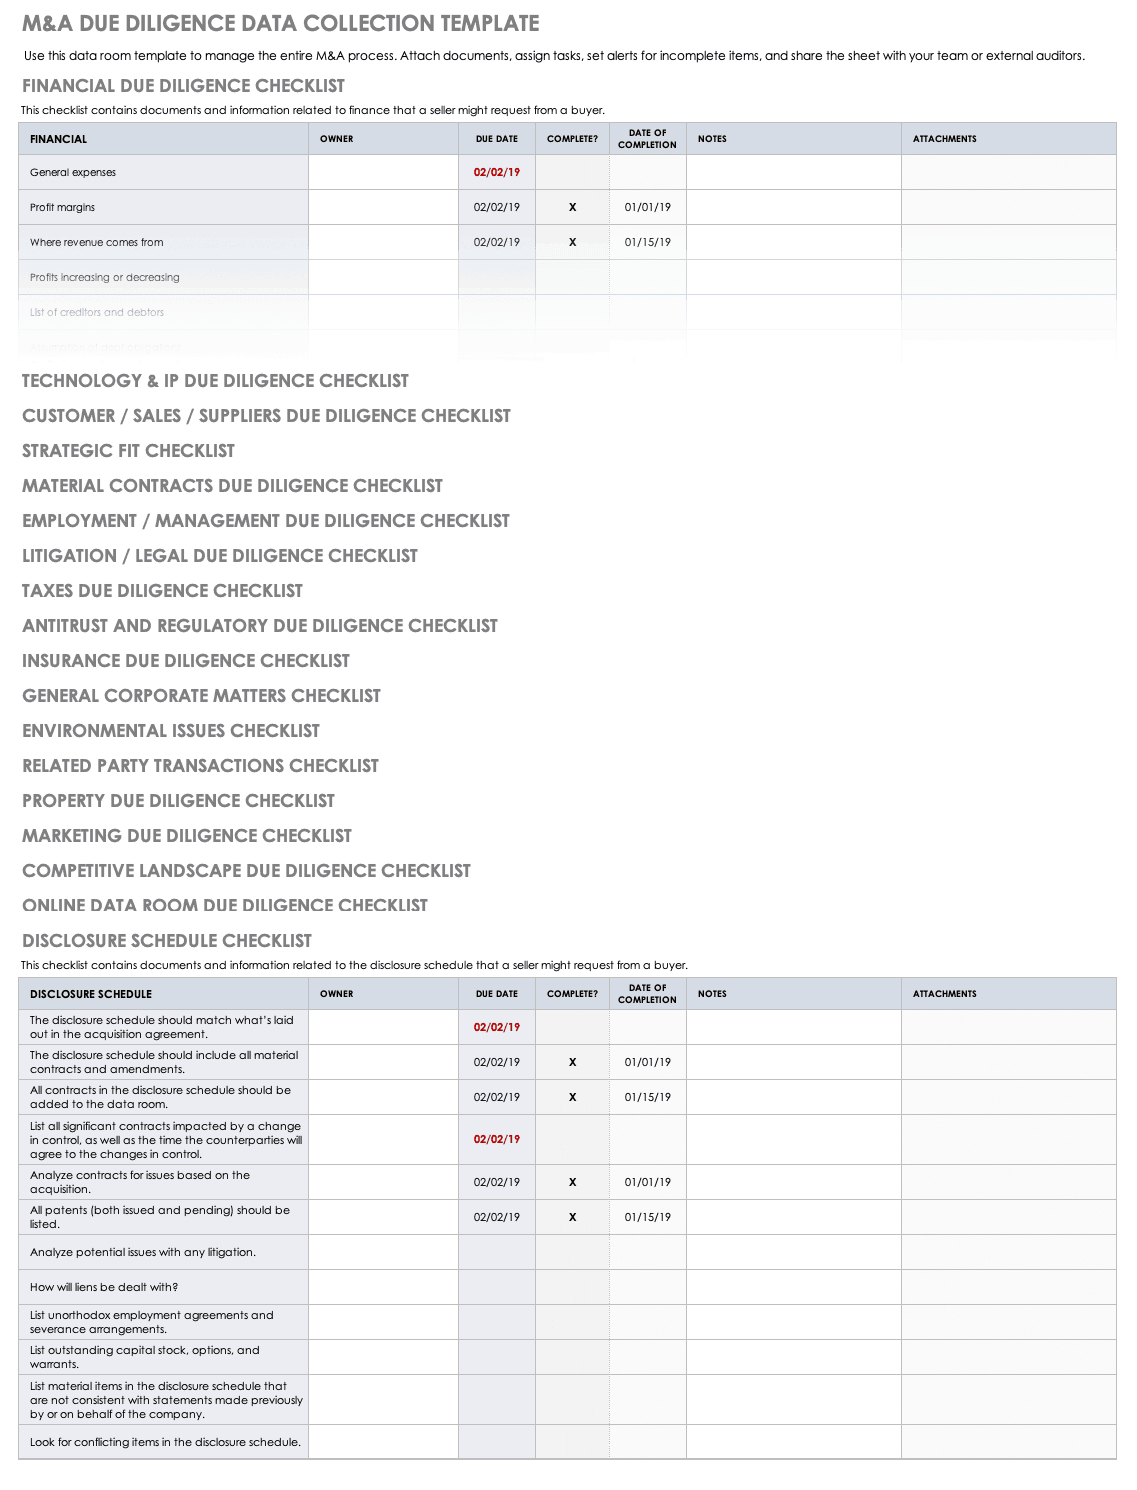 Free Due Diligence Templates And Checklists | Smartsheet With Regard To Vendor Due Diligence Report Template